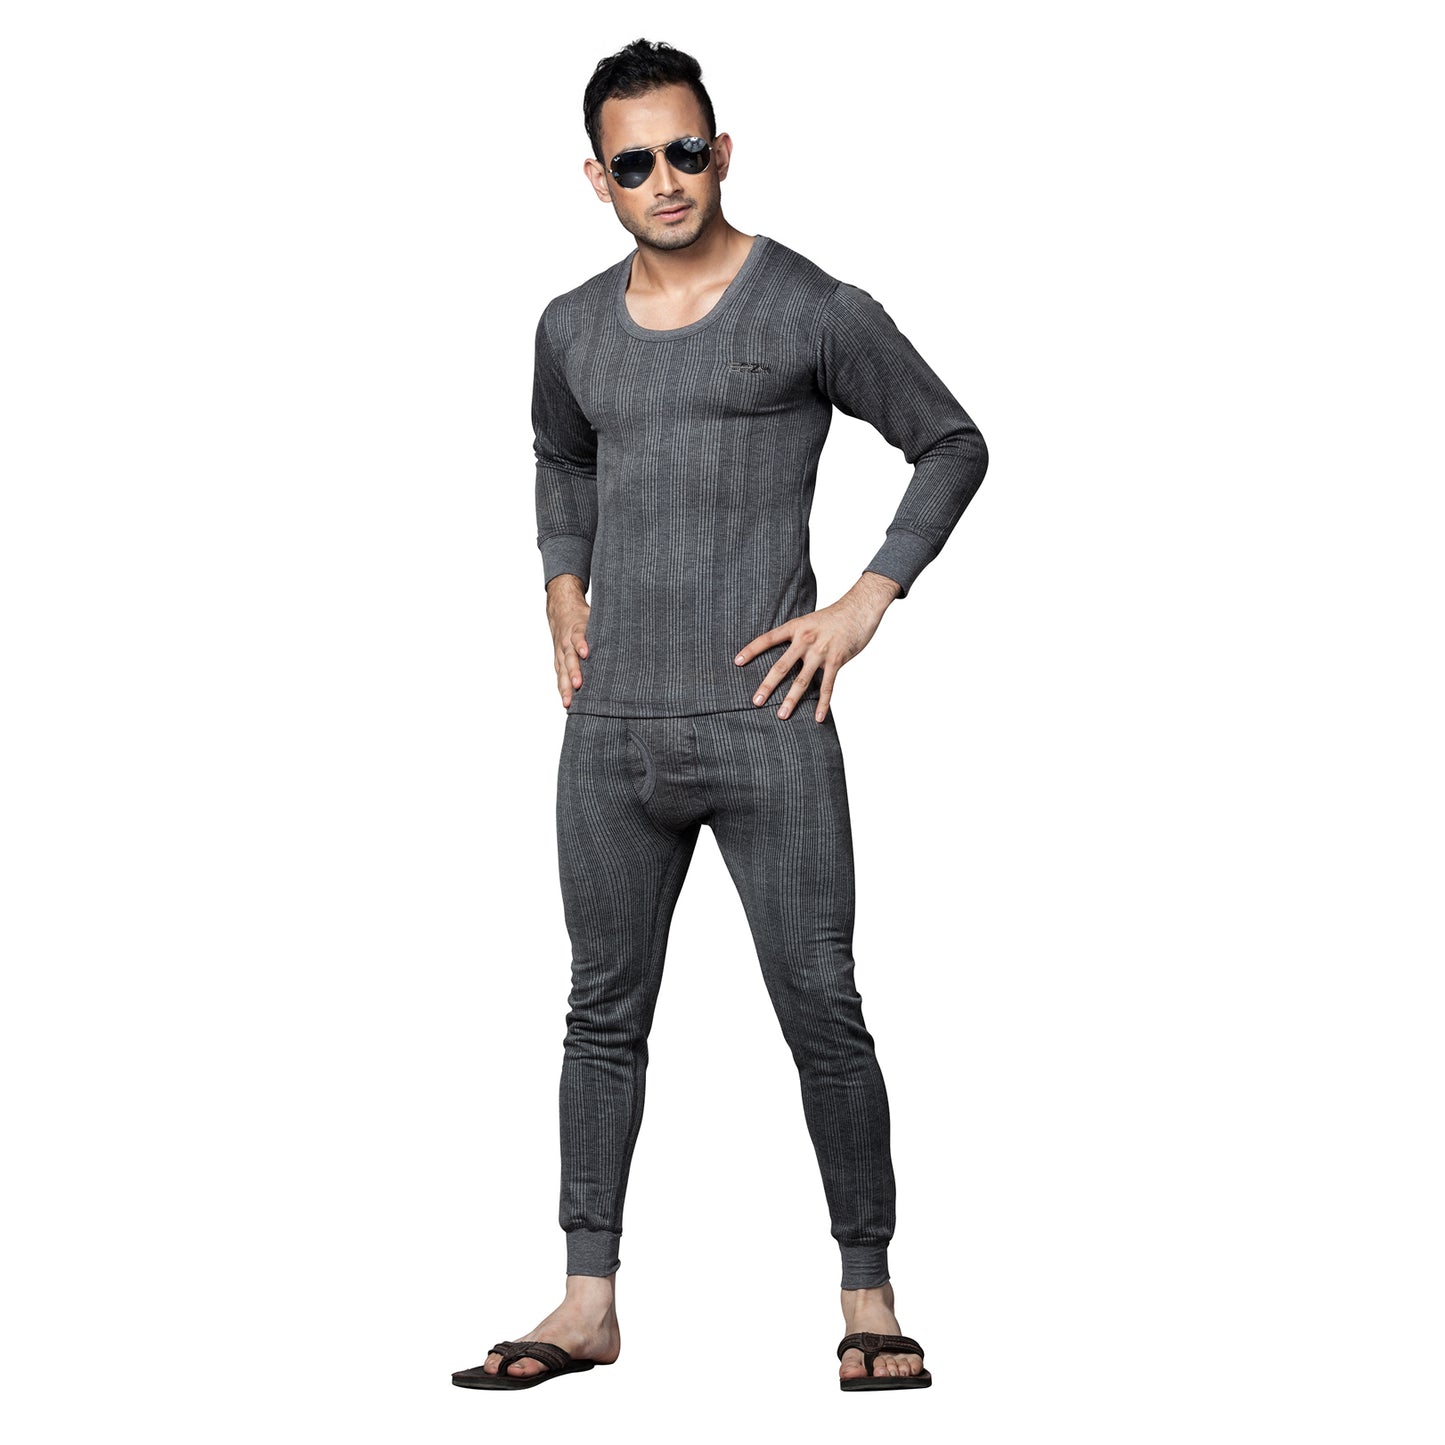 Sirtex Eazy Swelter Men's 2-Piece Thermal Set